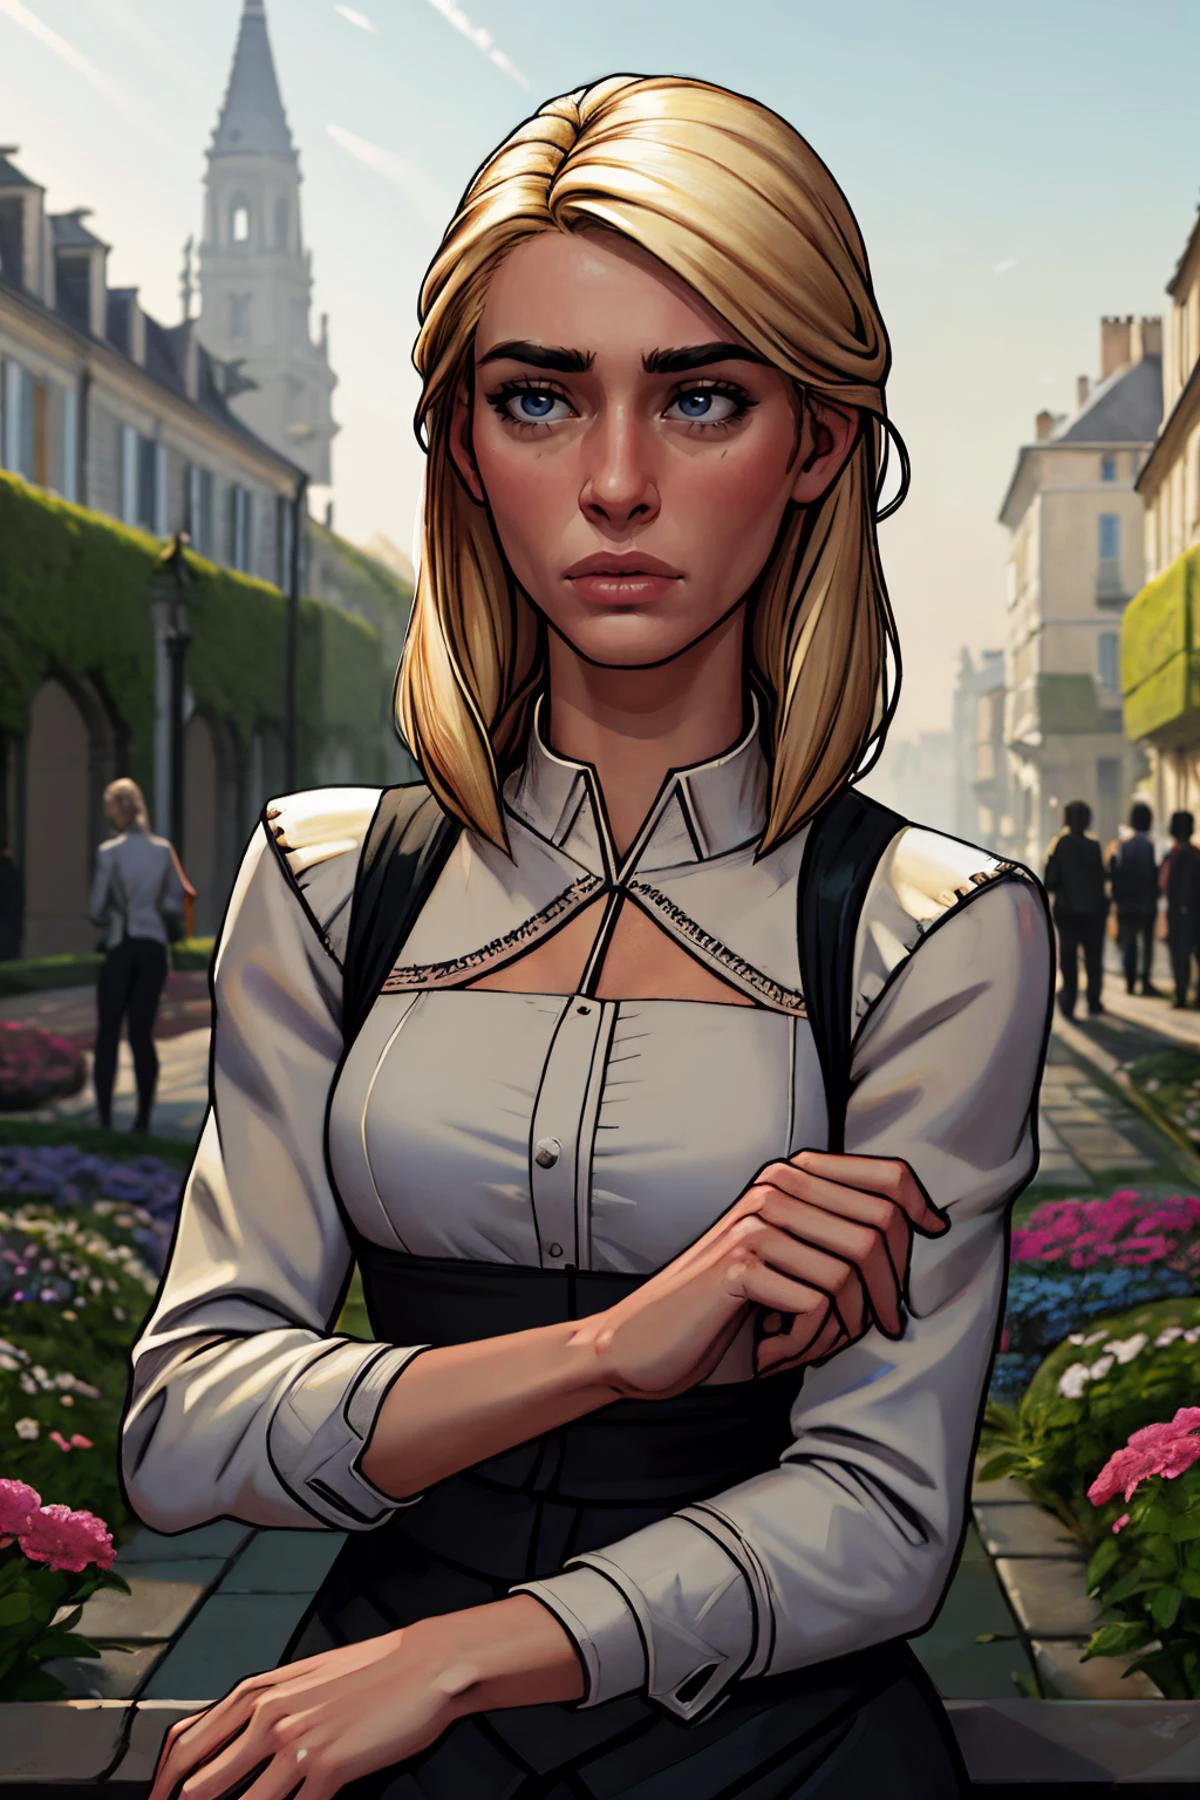 (high quality, best quality, highres, absurdres, sharp focus, masterpiece:1.2), (futuristic france, french:1), (1girl, woman, flustered face:1.1), (mason, wearing worn out clothes:1.1), (black_eyes:1), (blonde_hair, medium_hair, hair_up:1), (midweight body:1), (garden:1.1),